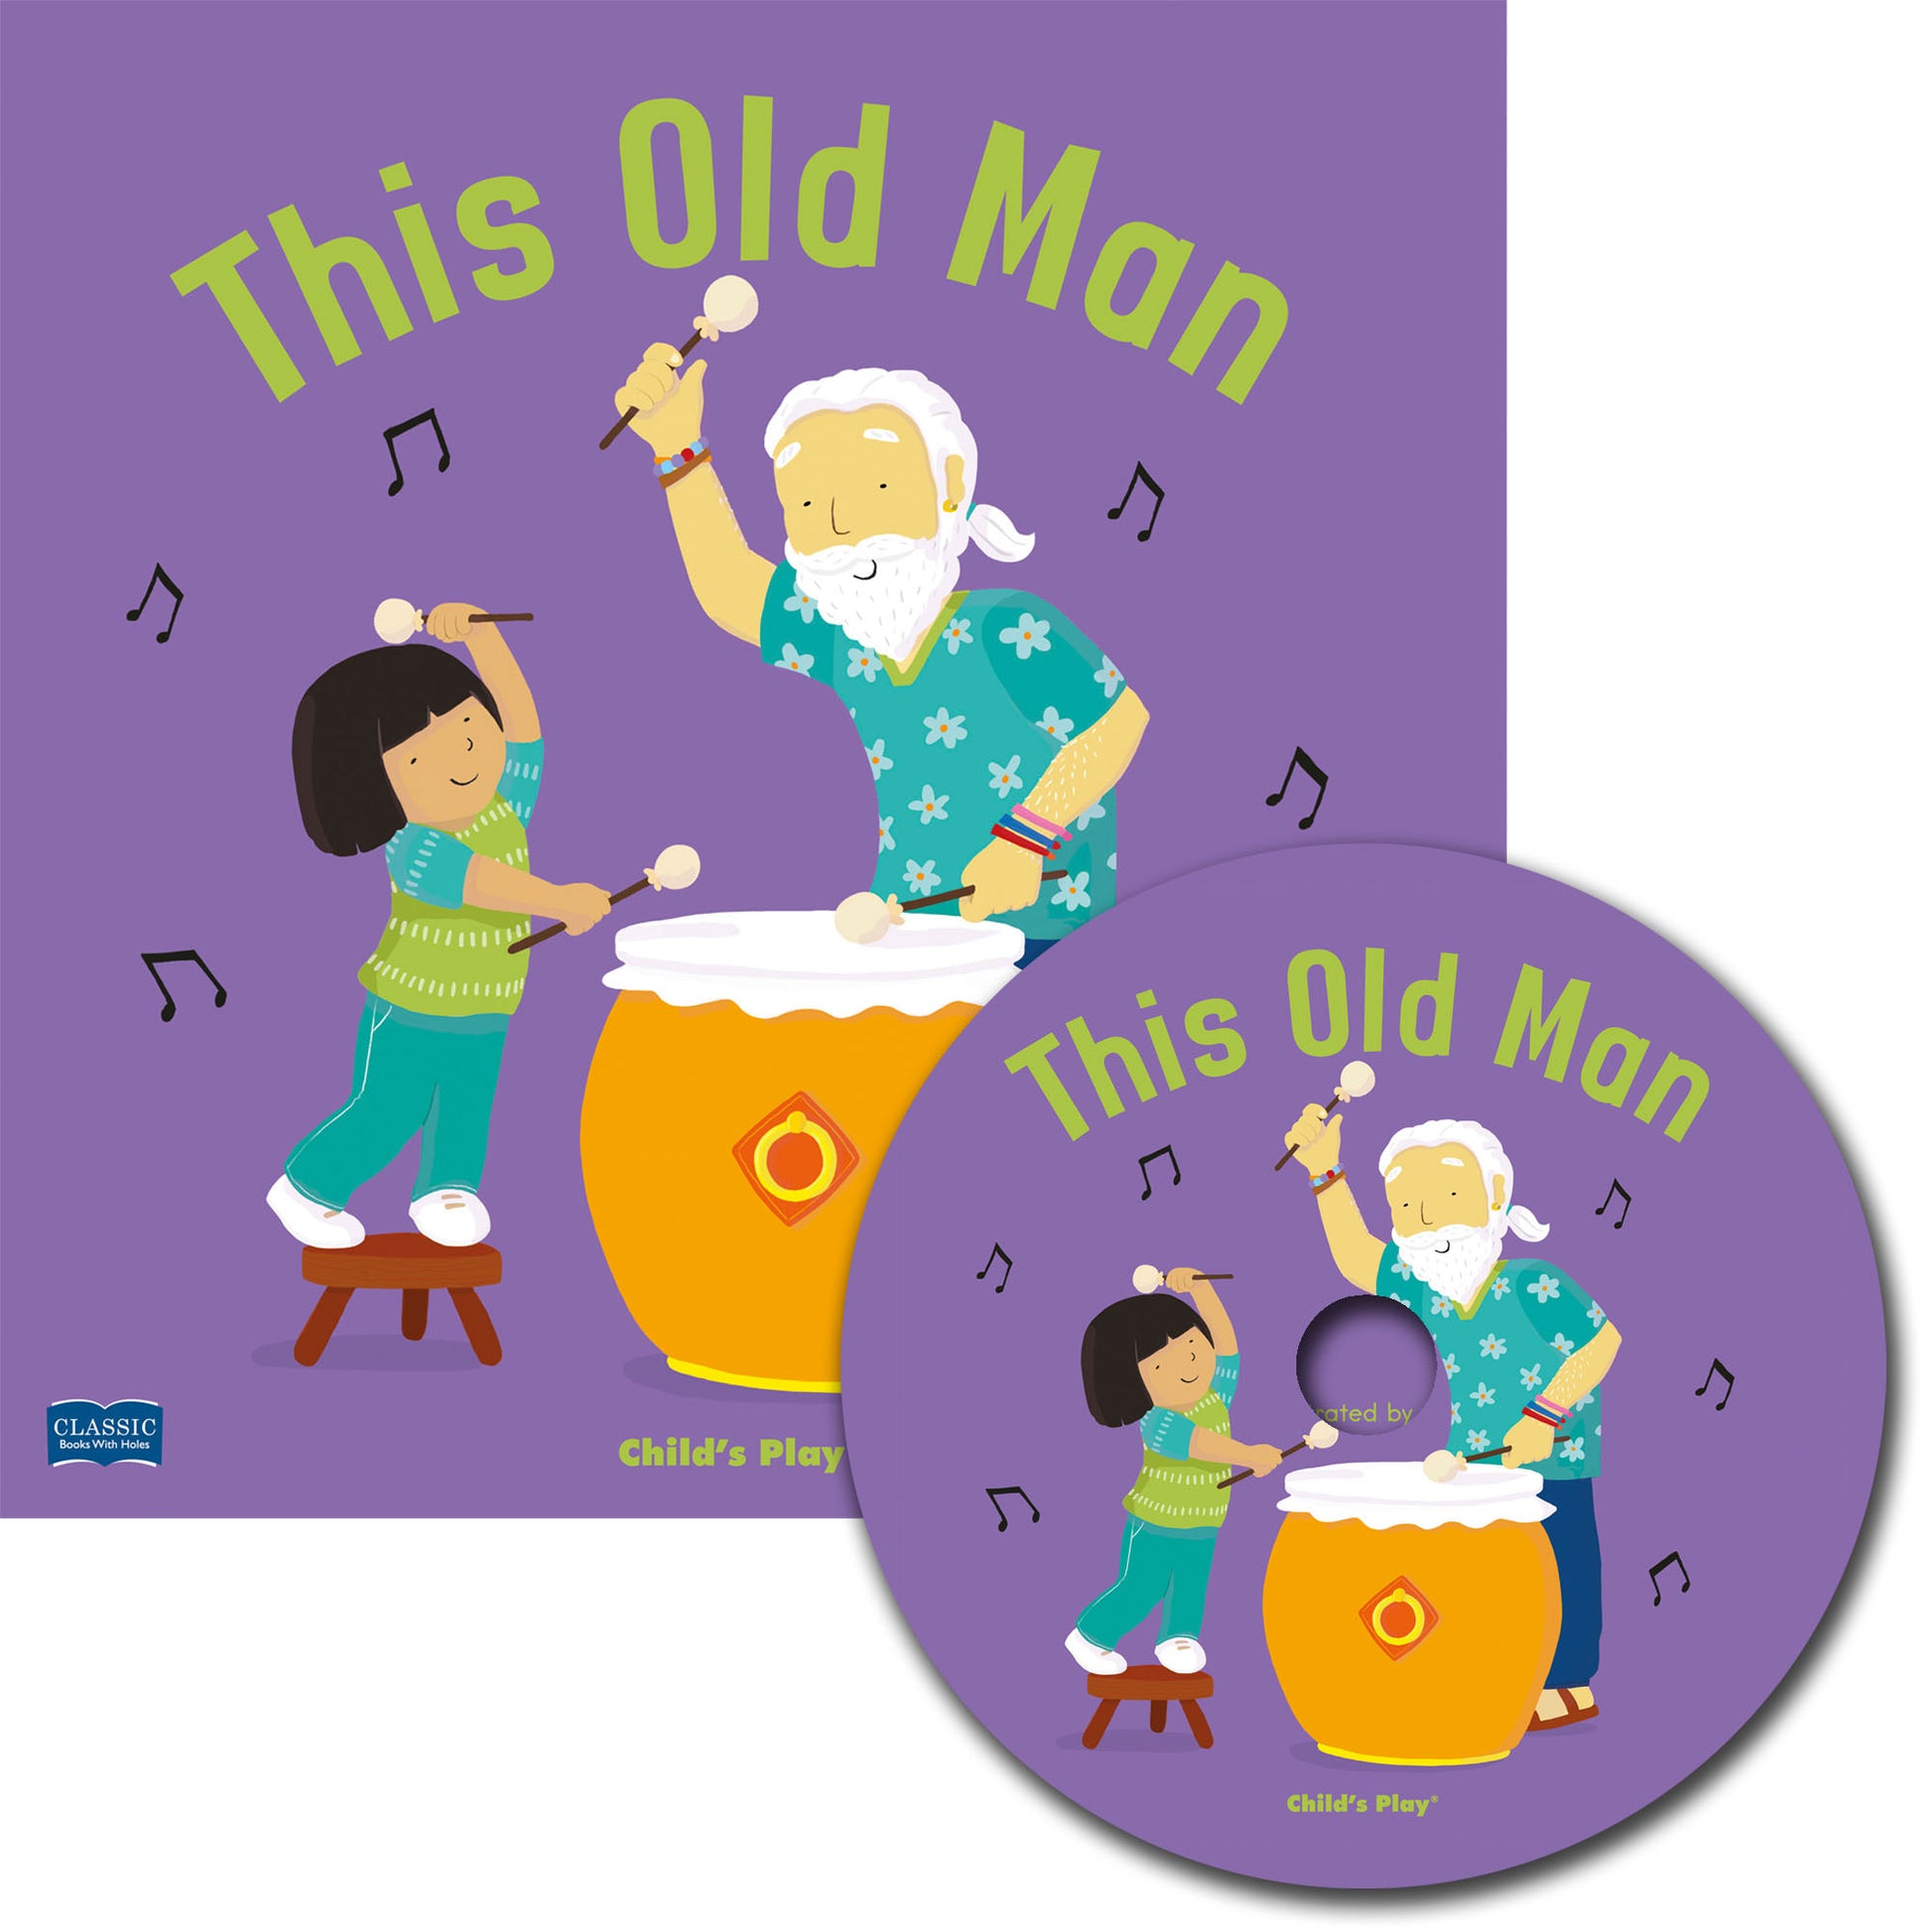 This Old Man (Softcover and CD Edition)